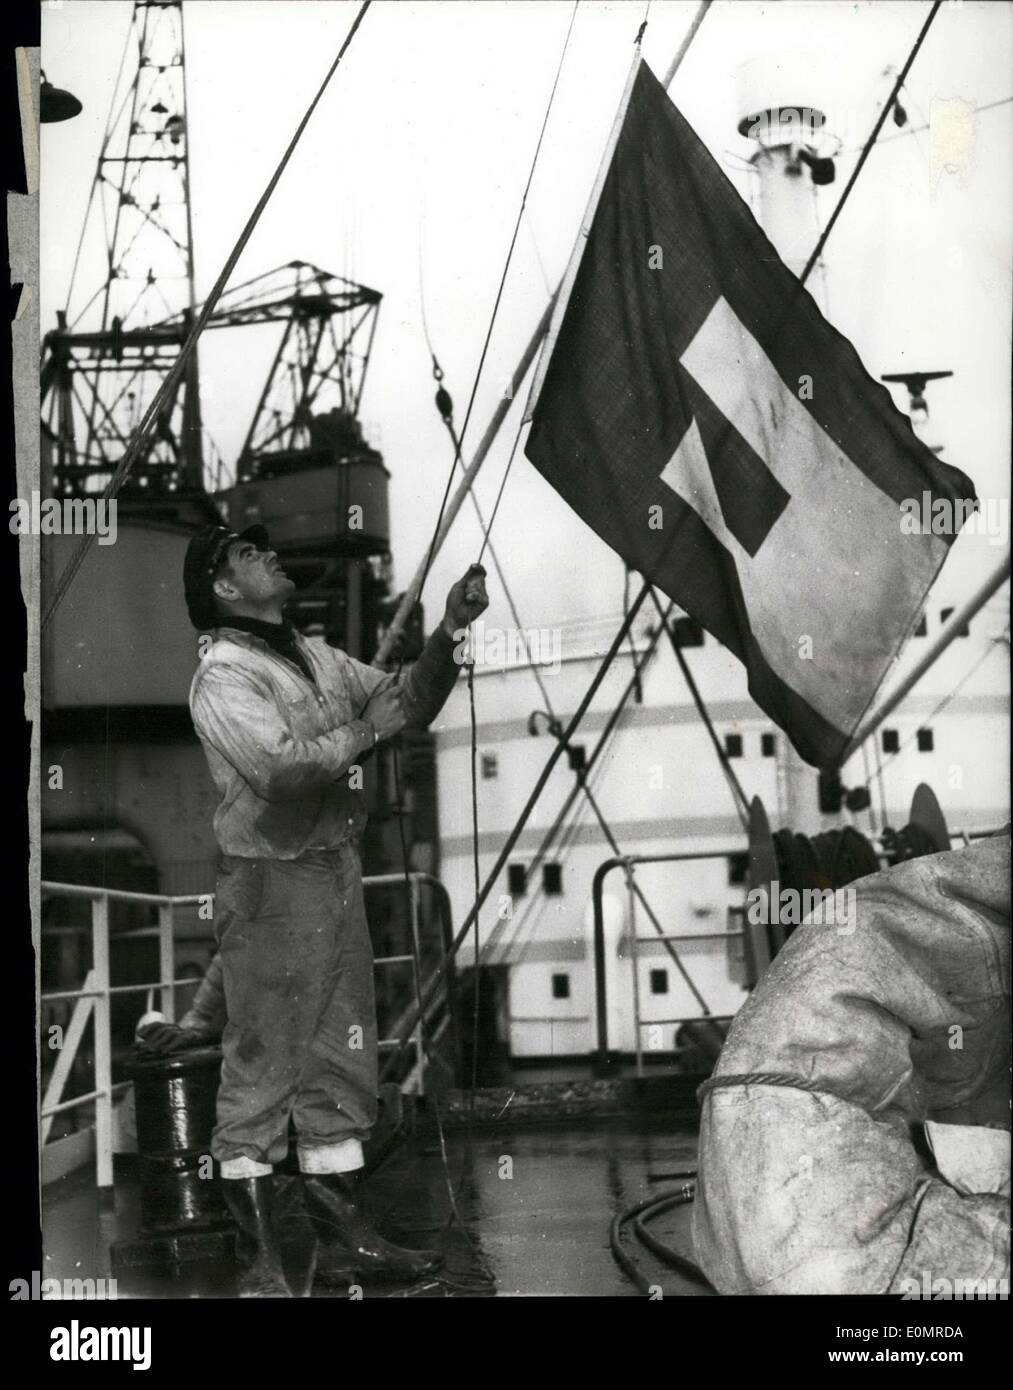 May 30, 1956 - The ''European flag'' with the green ''E'' in it, is hoisted up on all ships of the German ''Horn Line.'' Here a Stock Photo